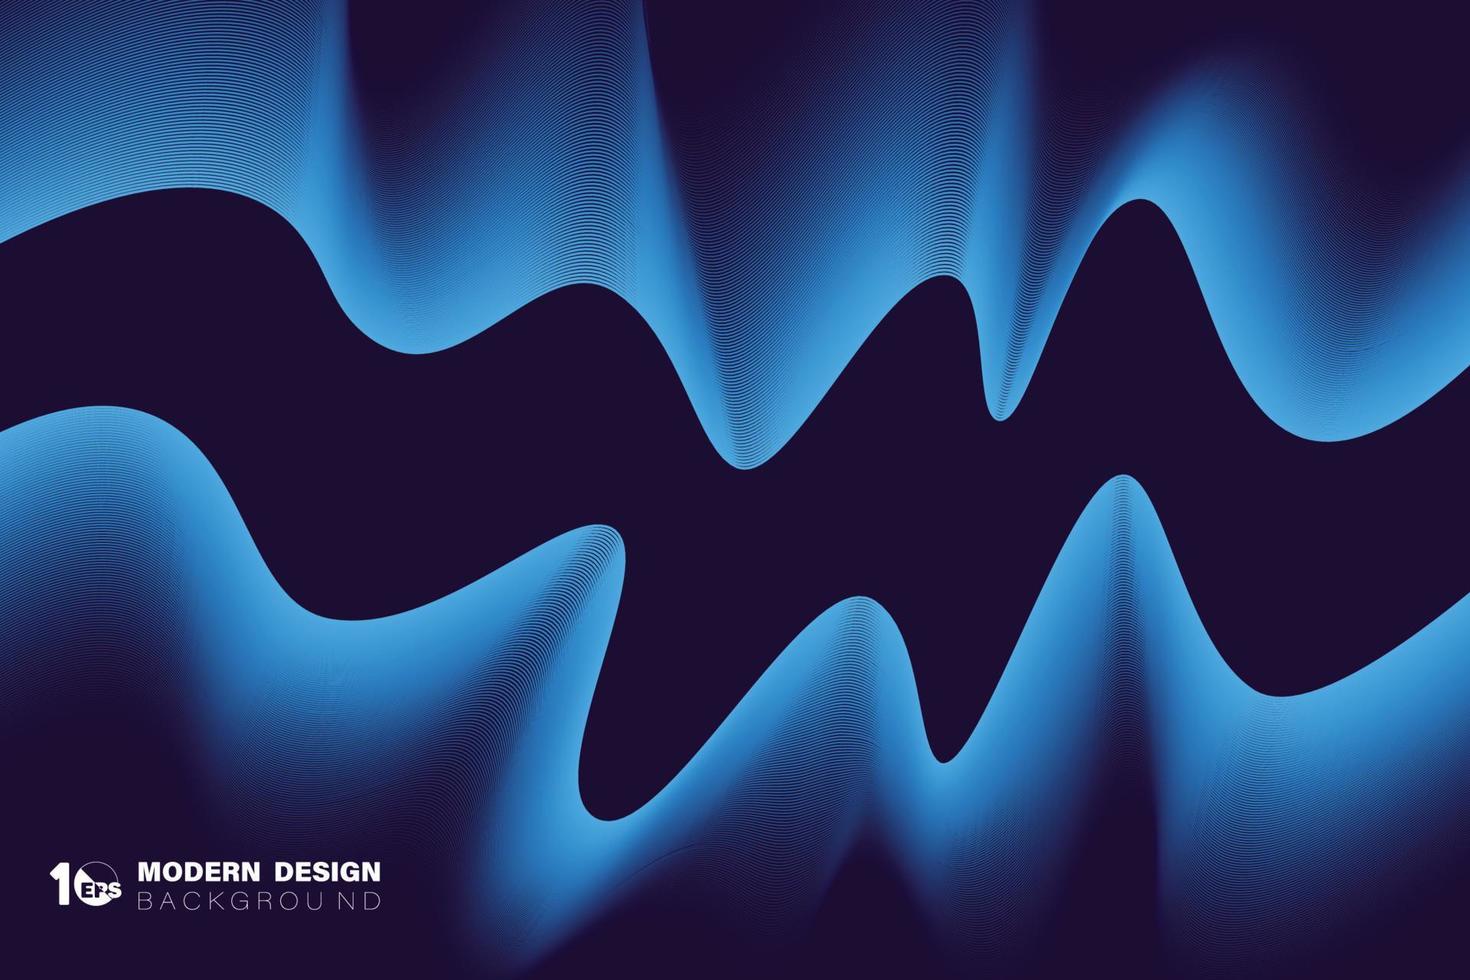 Abstract blue tech line wavy pattern of technology artwork background. illustration vector eps10